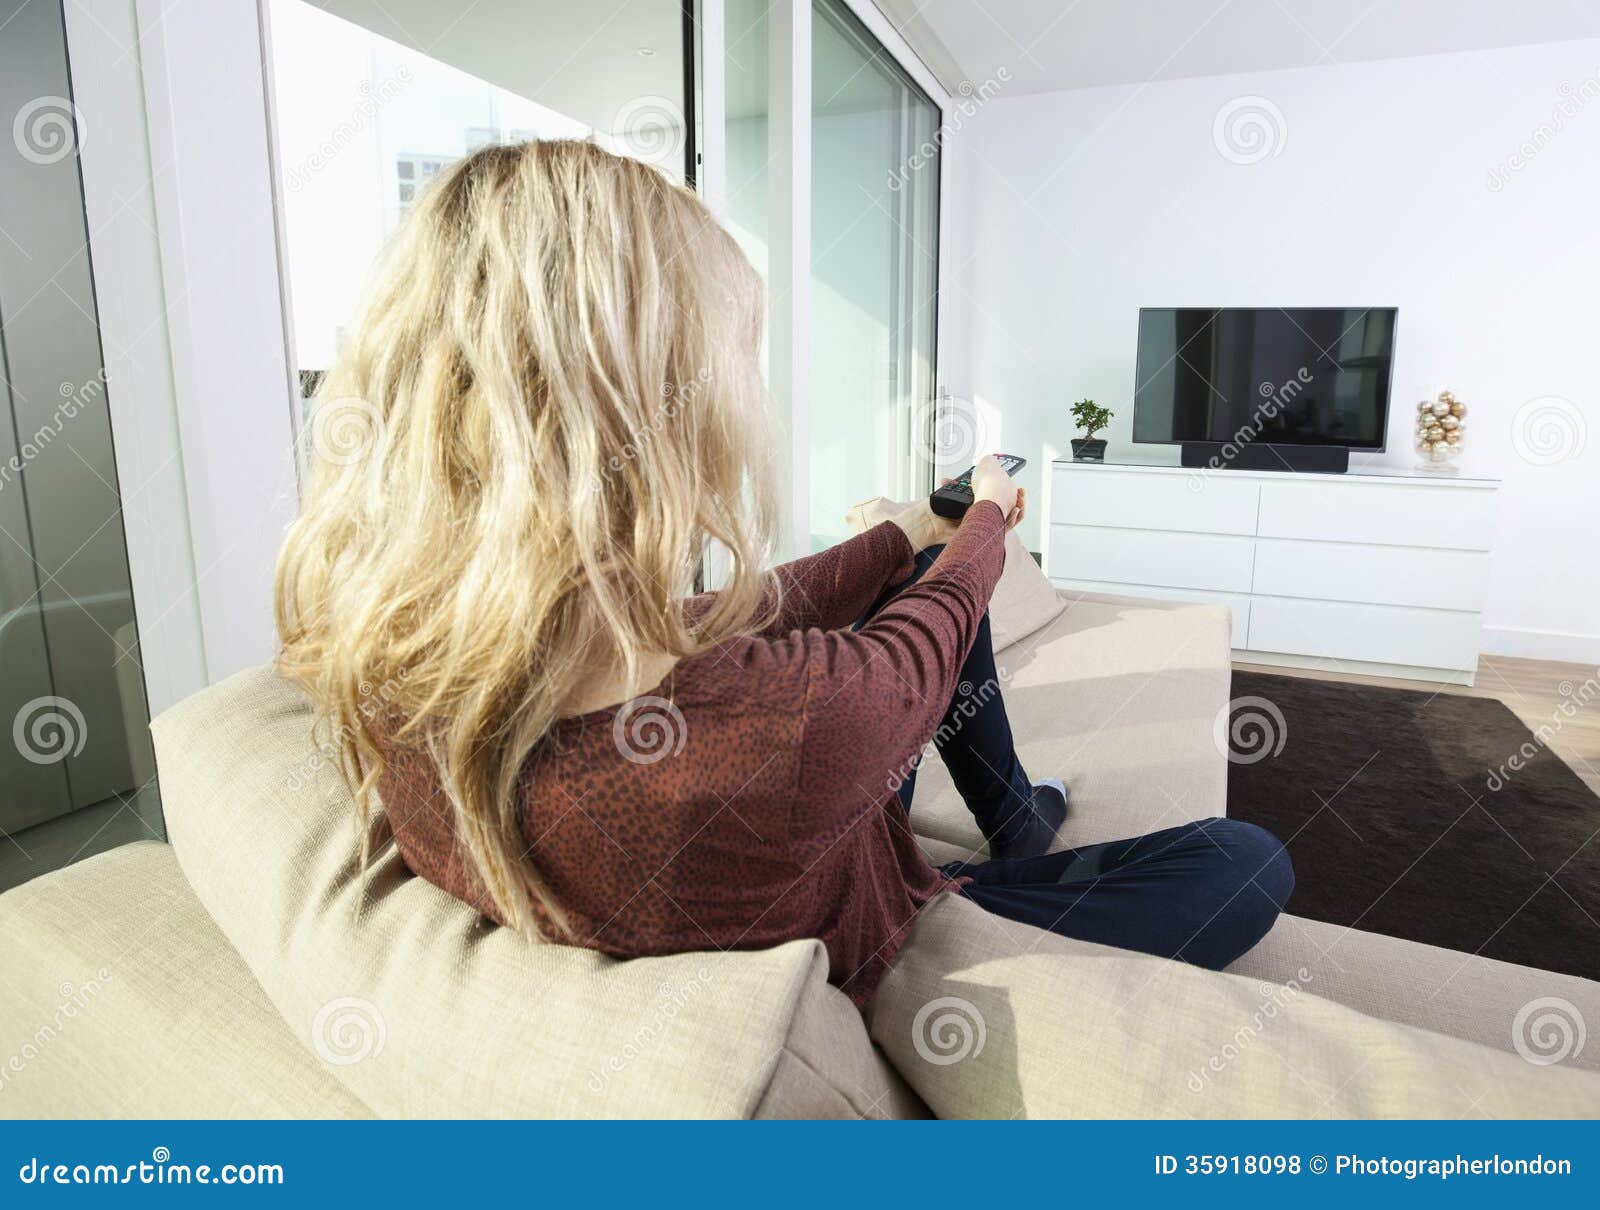 Rear View Of Young Woman Watching Television On Sof